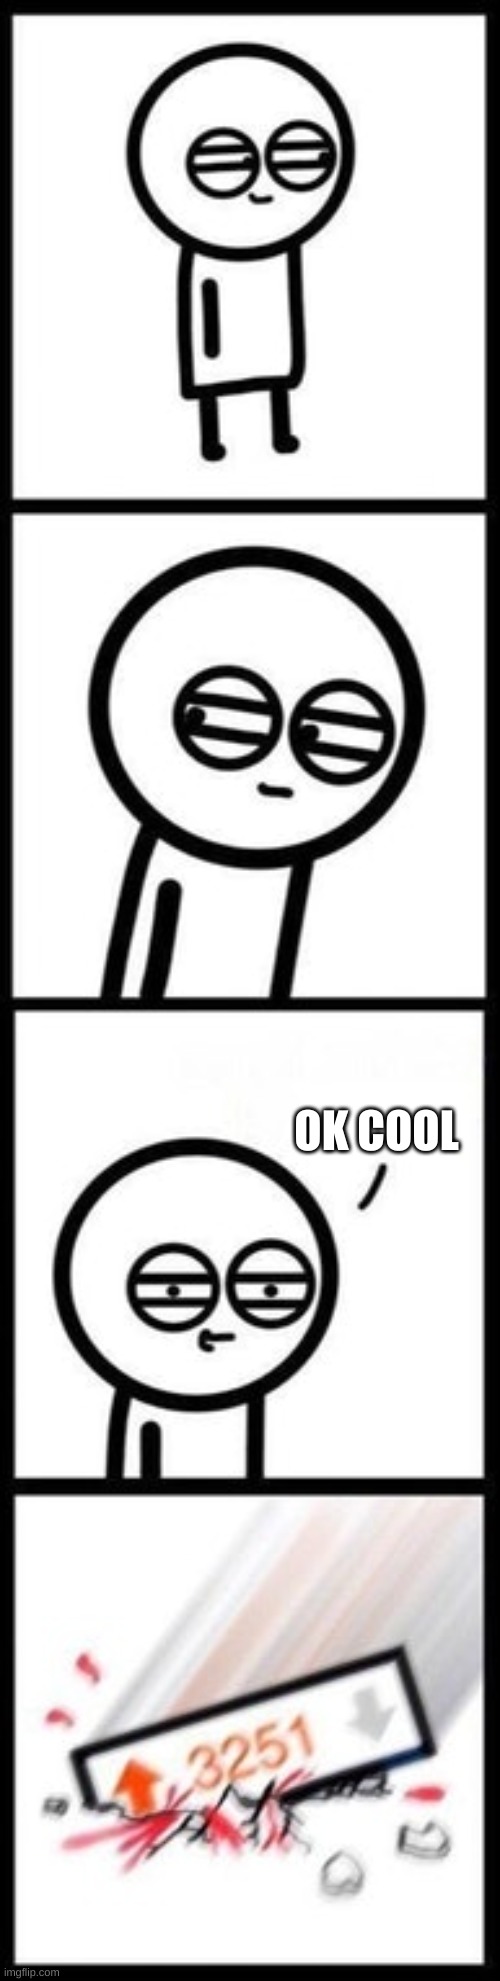 3251 upvotes | OK COOL | image tagged in 3251 upvotes | made w/ Imgflip meme maker